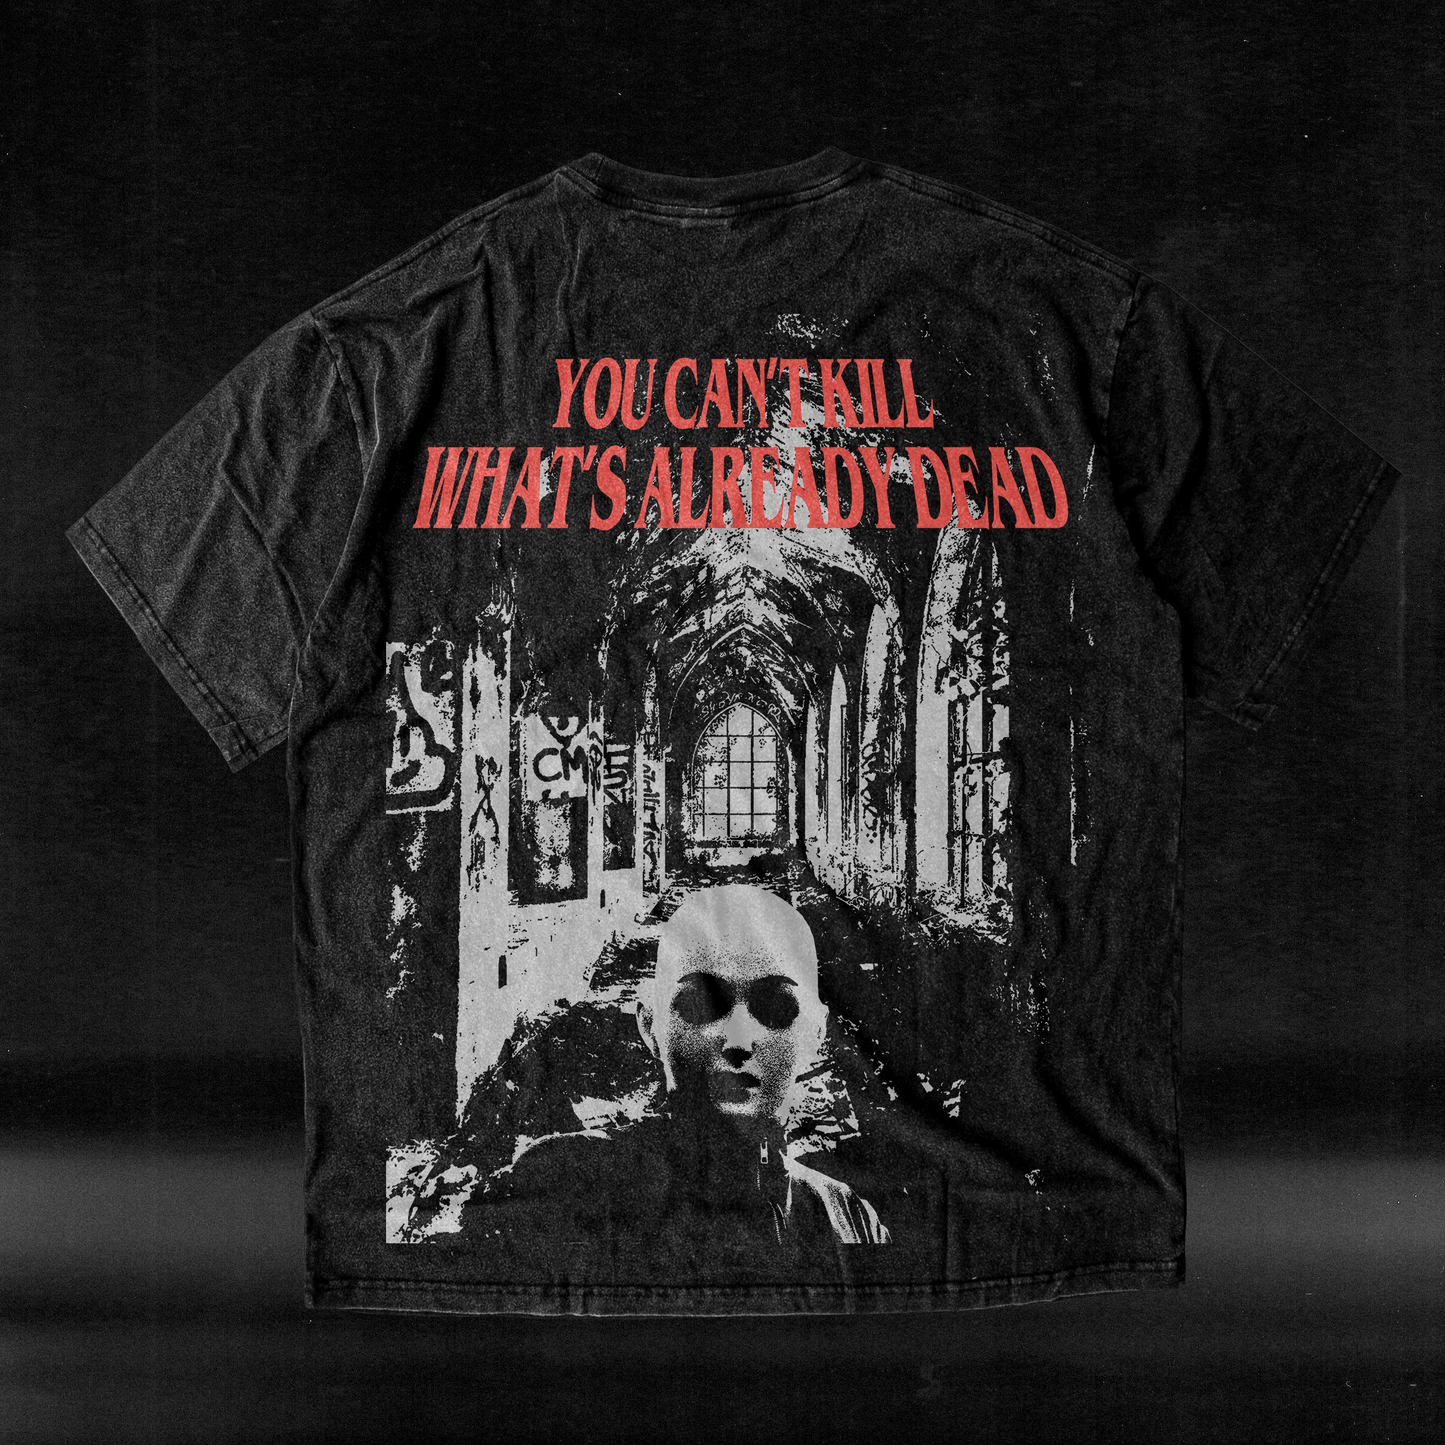 CAROL VINTAGE T SHIRT “YOU CANT WHATS ALREADY DEAD”